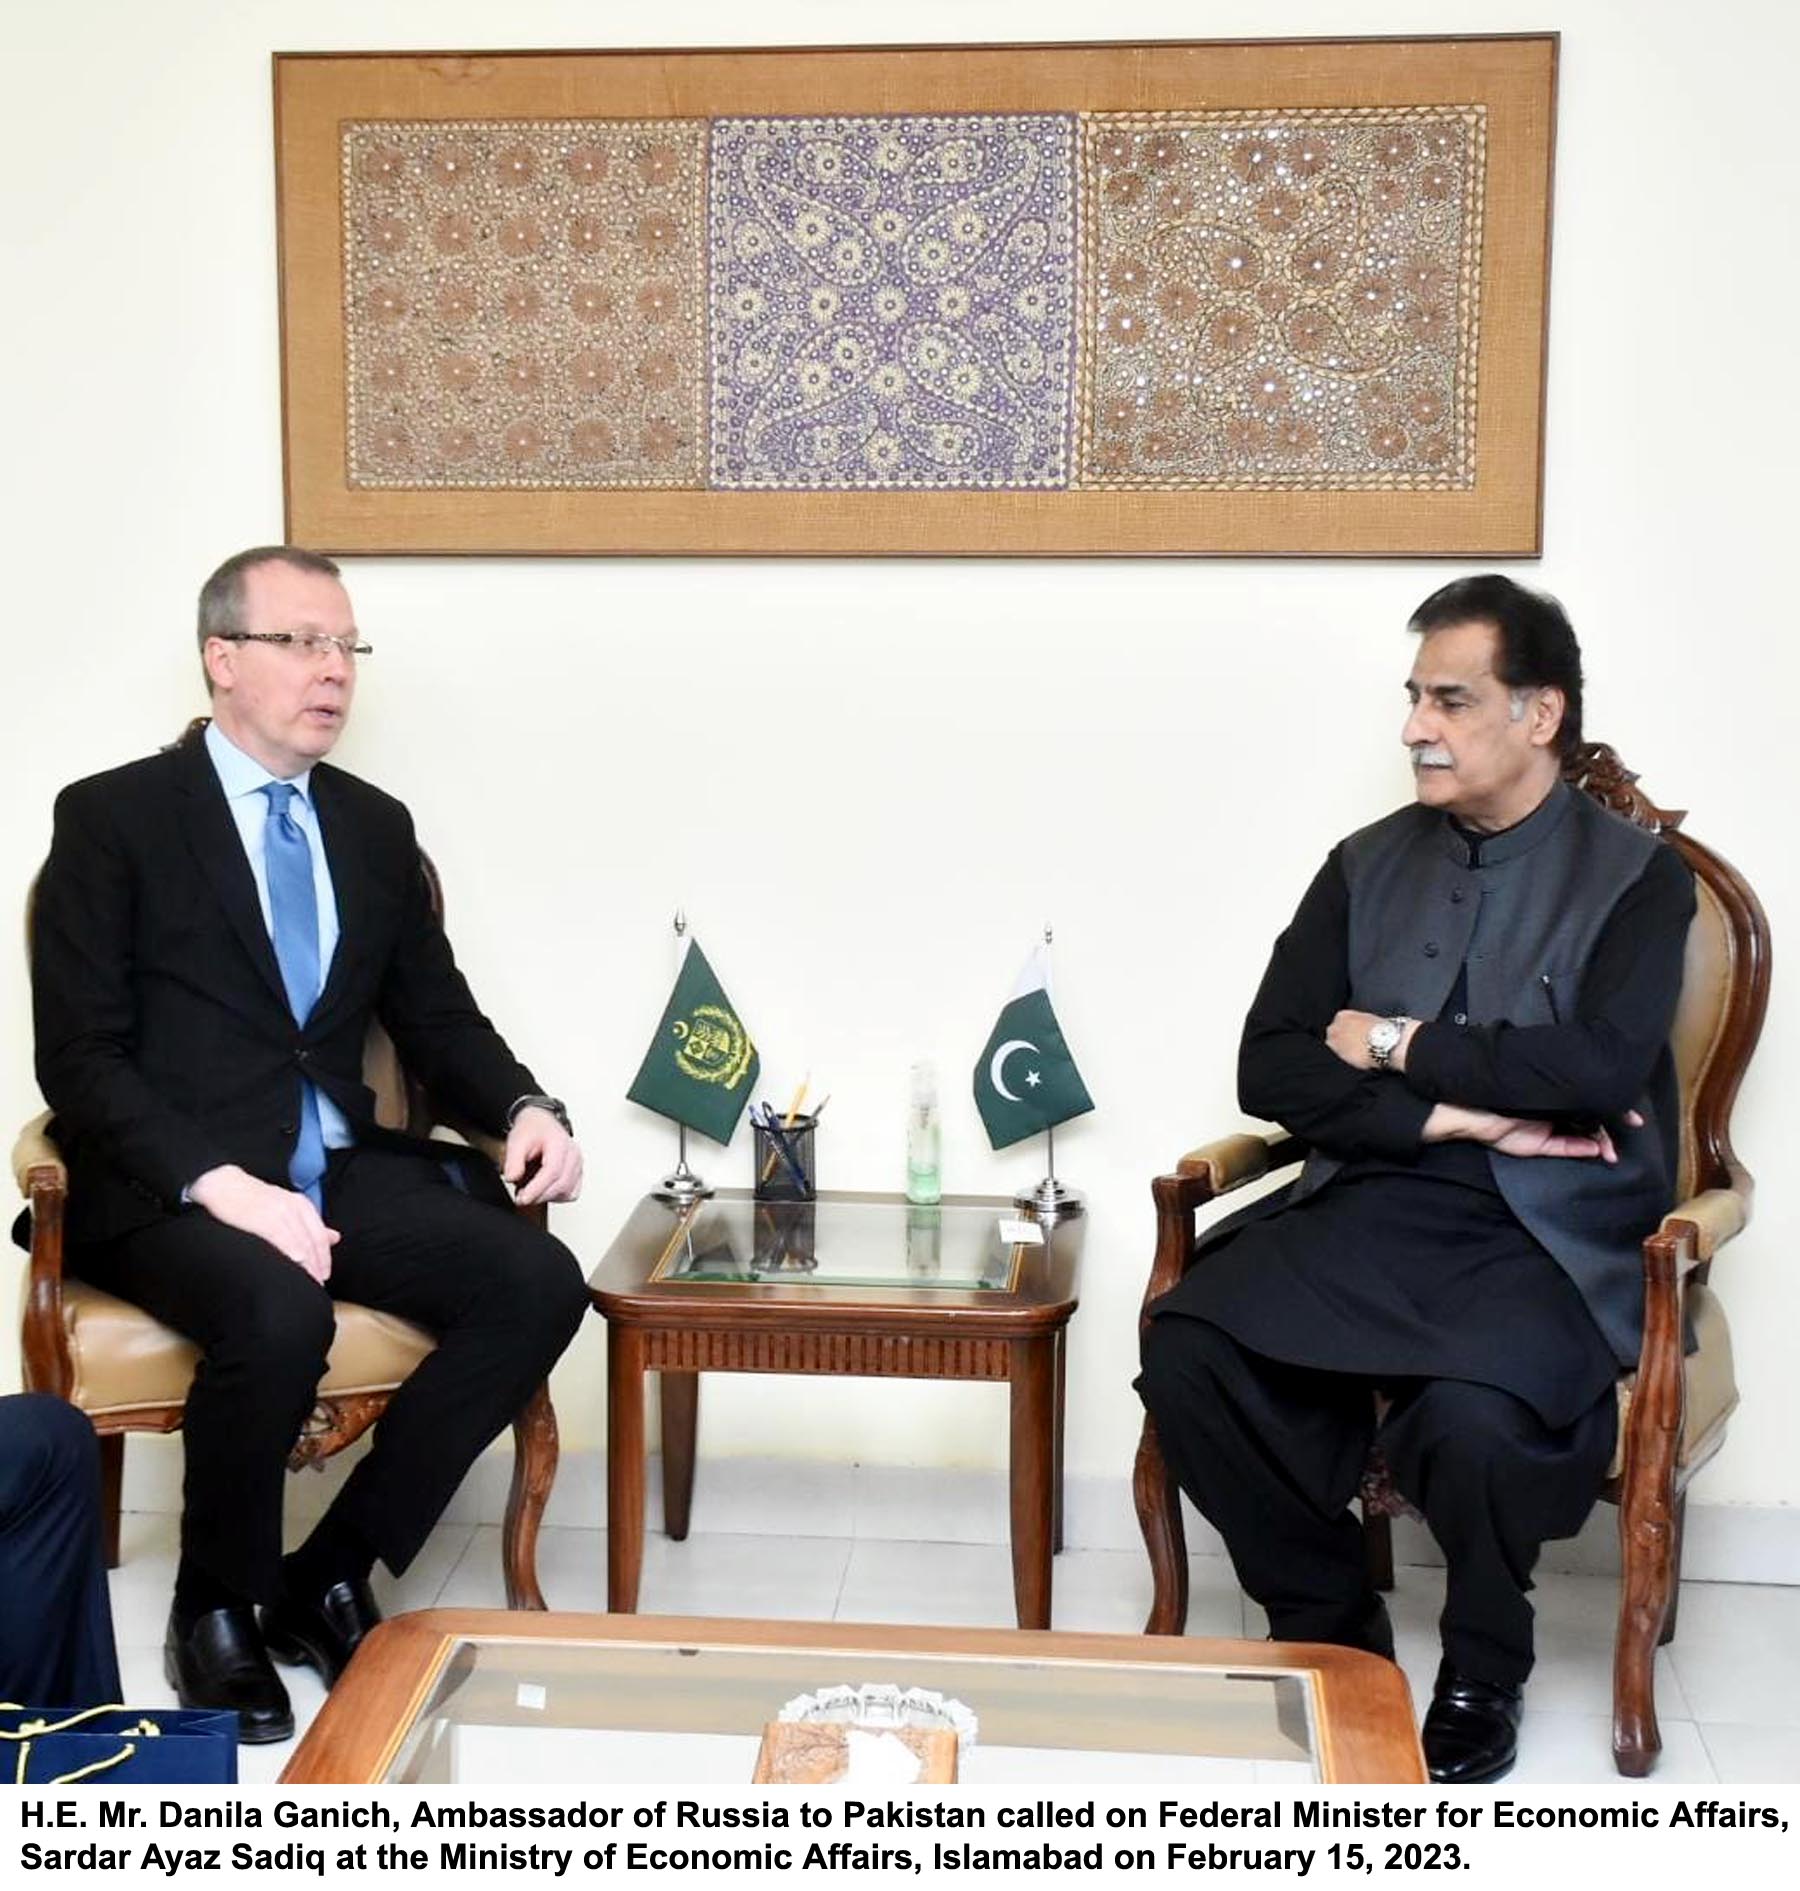 MEETING OF MINISTER FOR ECONOMIC AFFAIRS WITH H.E. MR. DANILA GANICH, AMBASSADOR OF RUSSIA TO PAKISTAN.